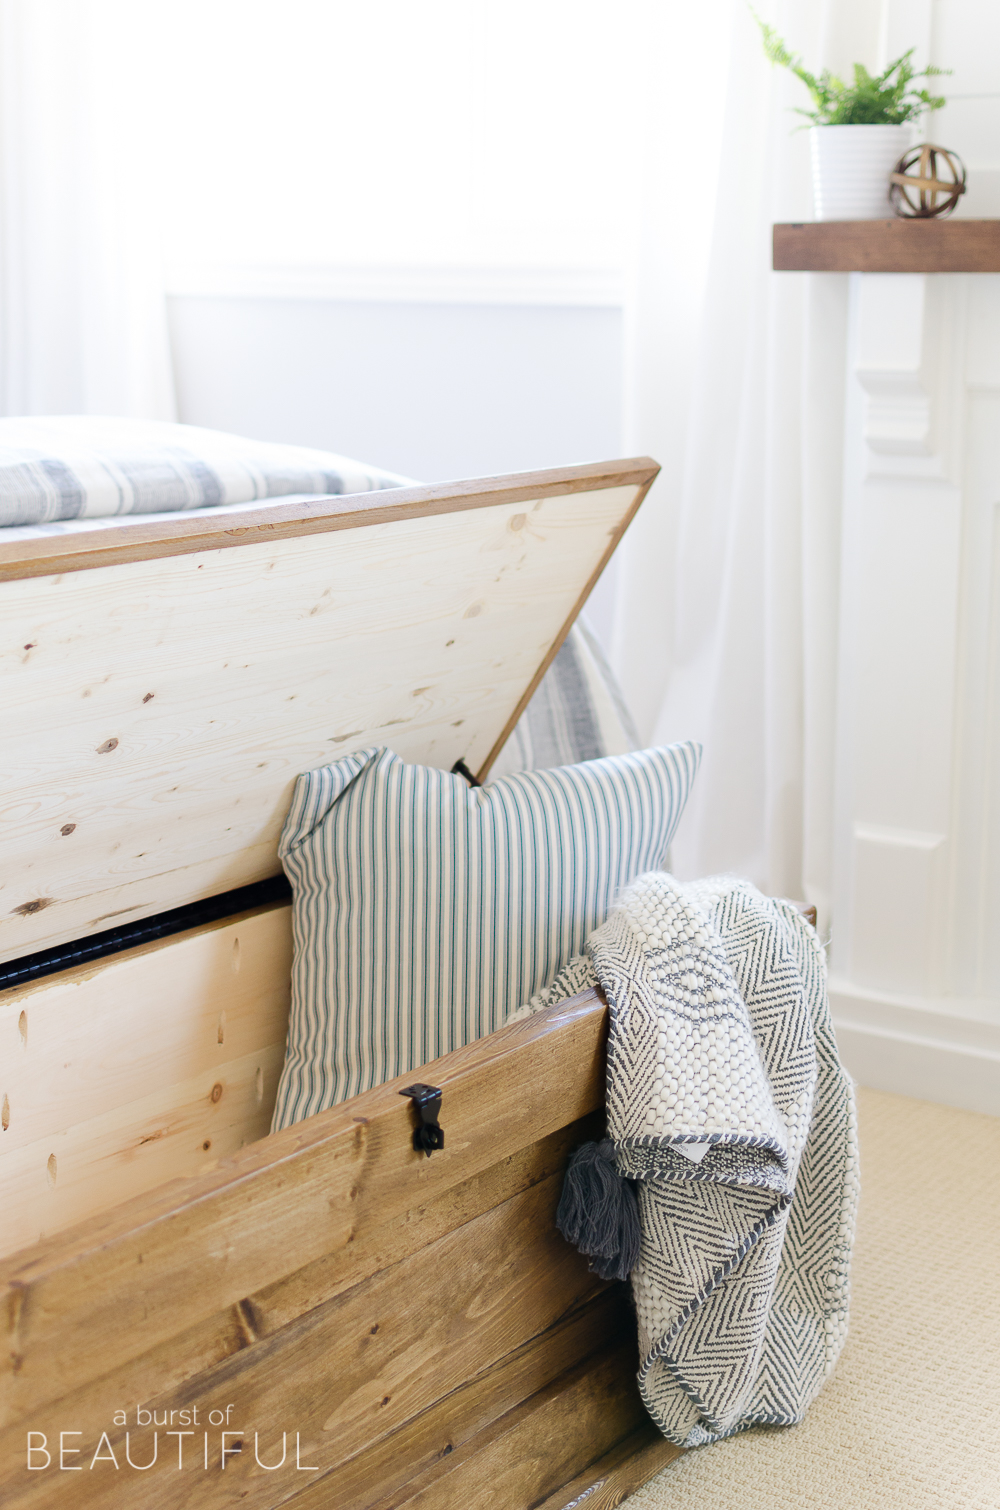 This DIY blanket storage chest will fit beautifully into any space and provides great additional storage for items such as blankets, pillows and toys. It can also be used as a coffee table, bench in an entryway or at the foot of a bed. It's simple, clean lines make it a timeless piece for your home.